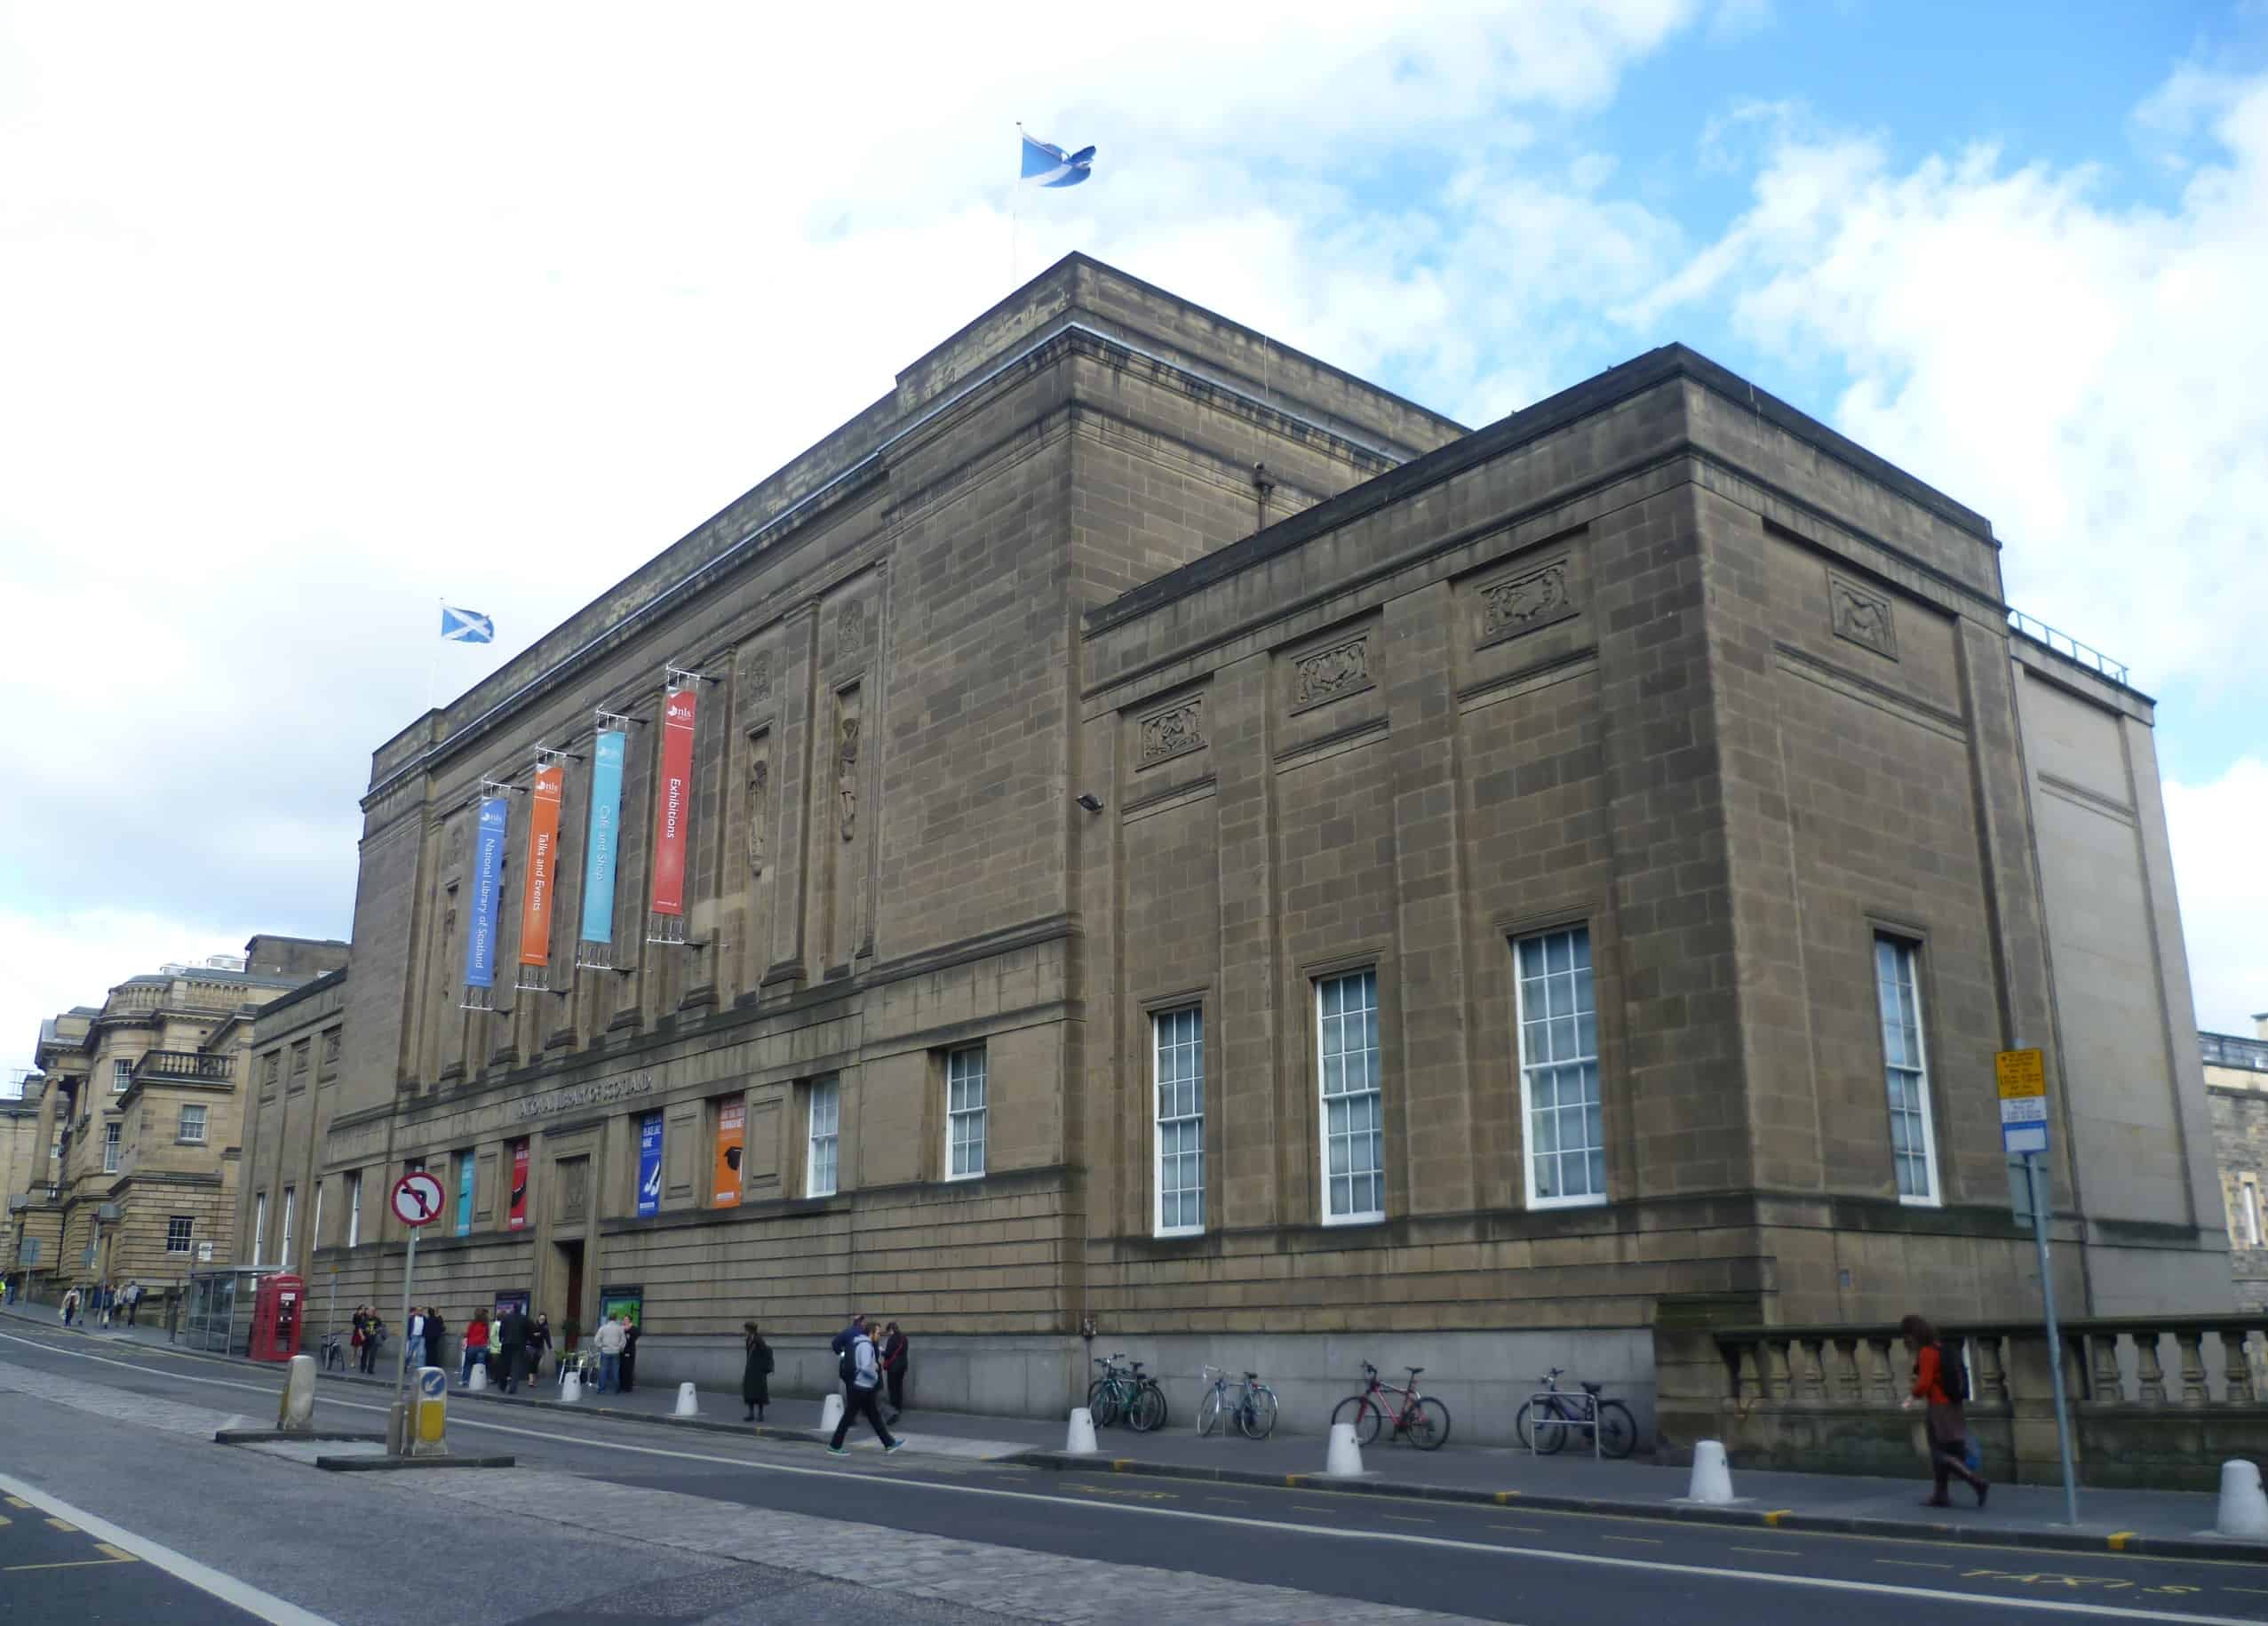 National library of Scotland